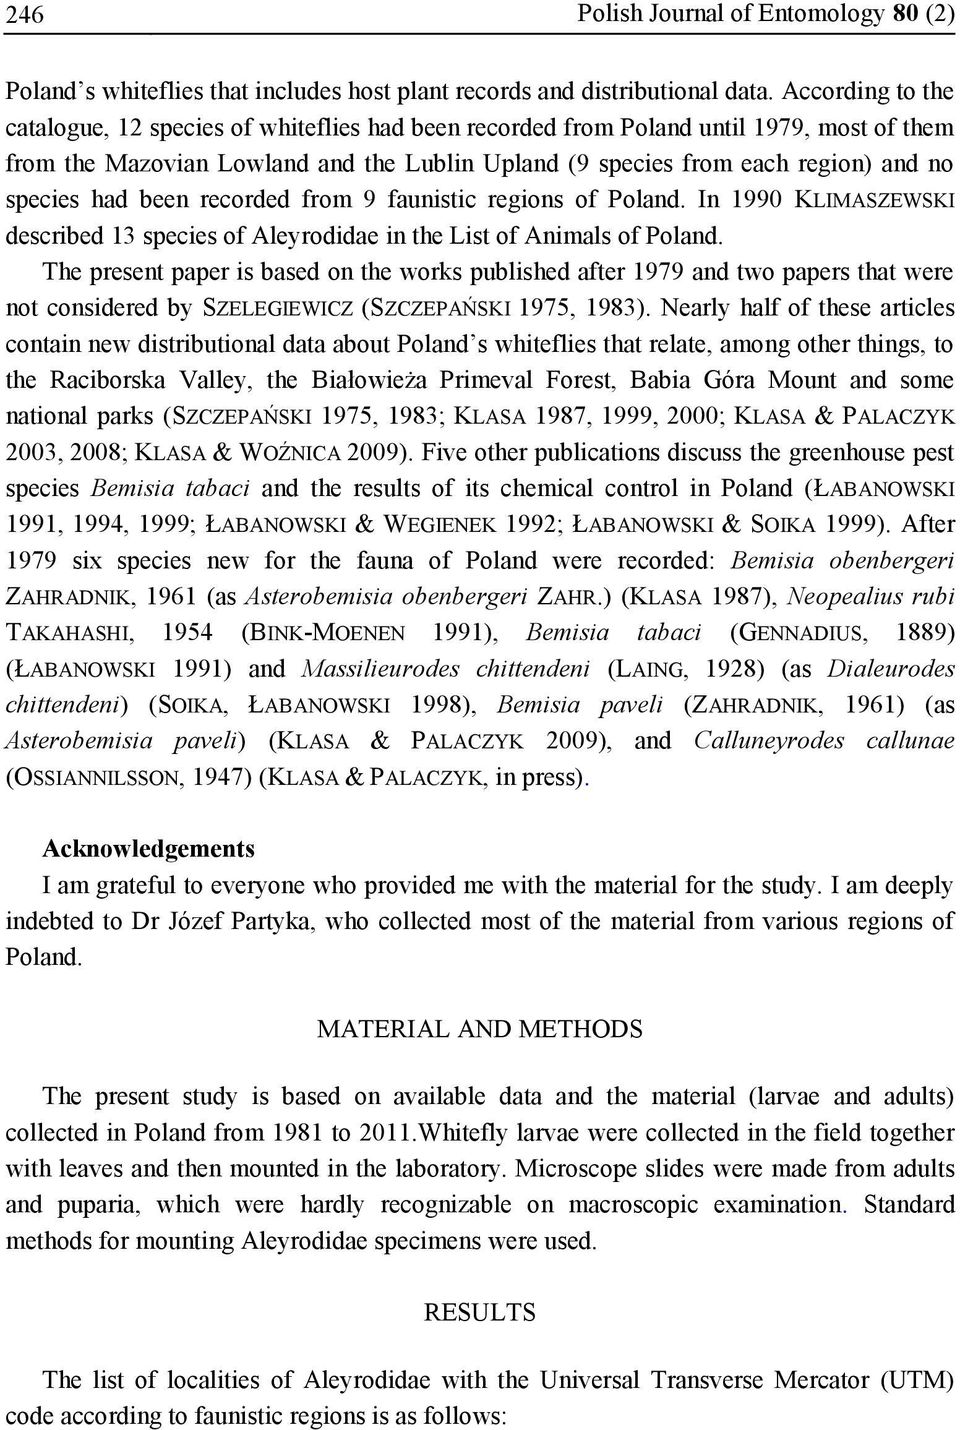 had been recorded from 9 faunistic regions of Poland. In 1990 KLIMASZEWSKI described 13 species of Aleyrodidae in the List of Animals of Poland.